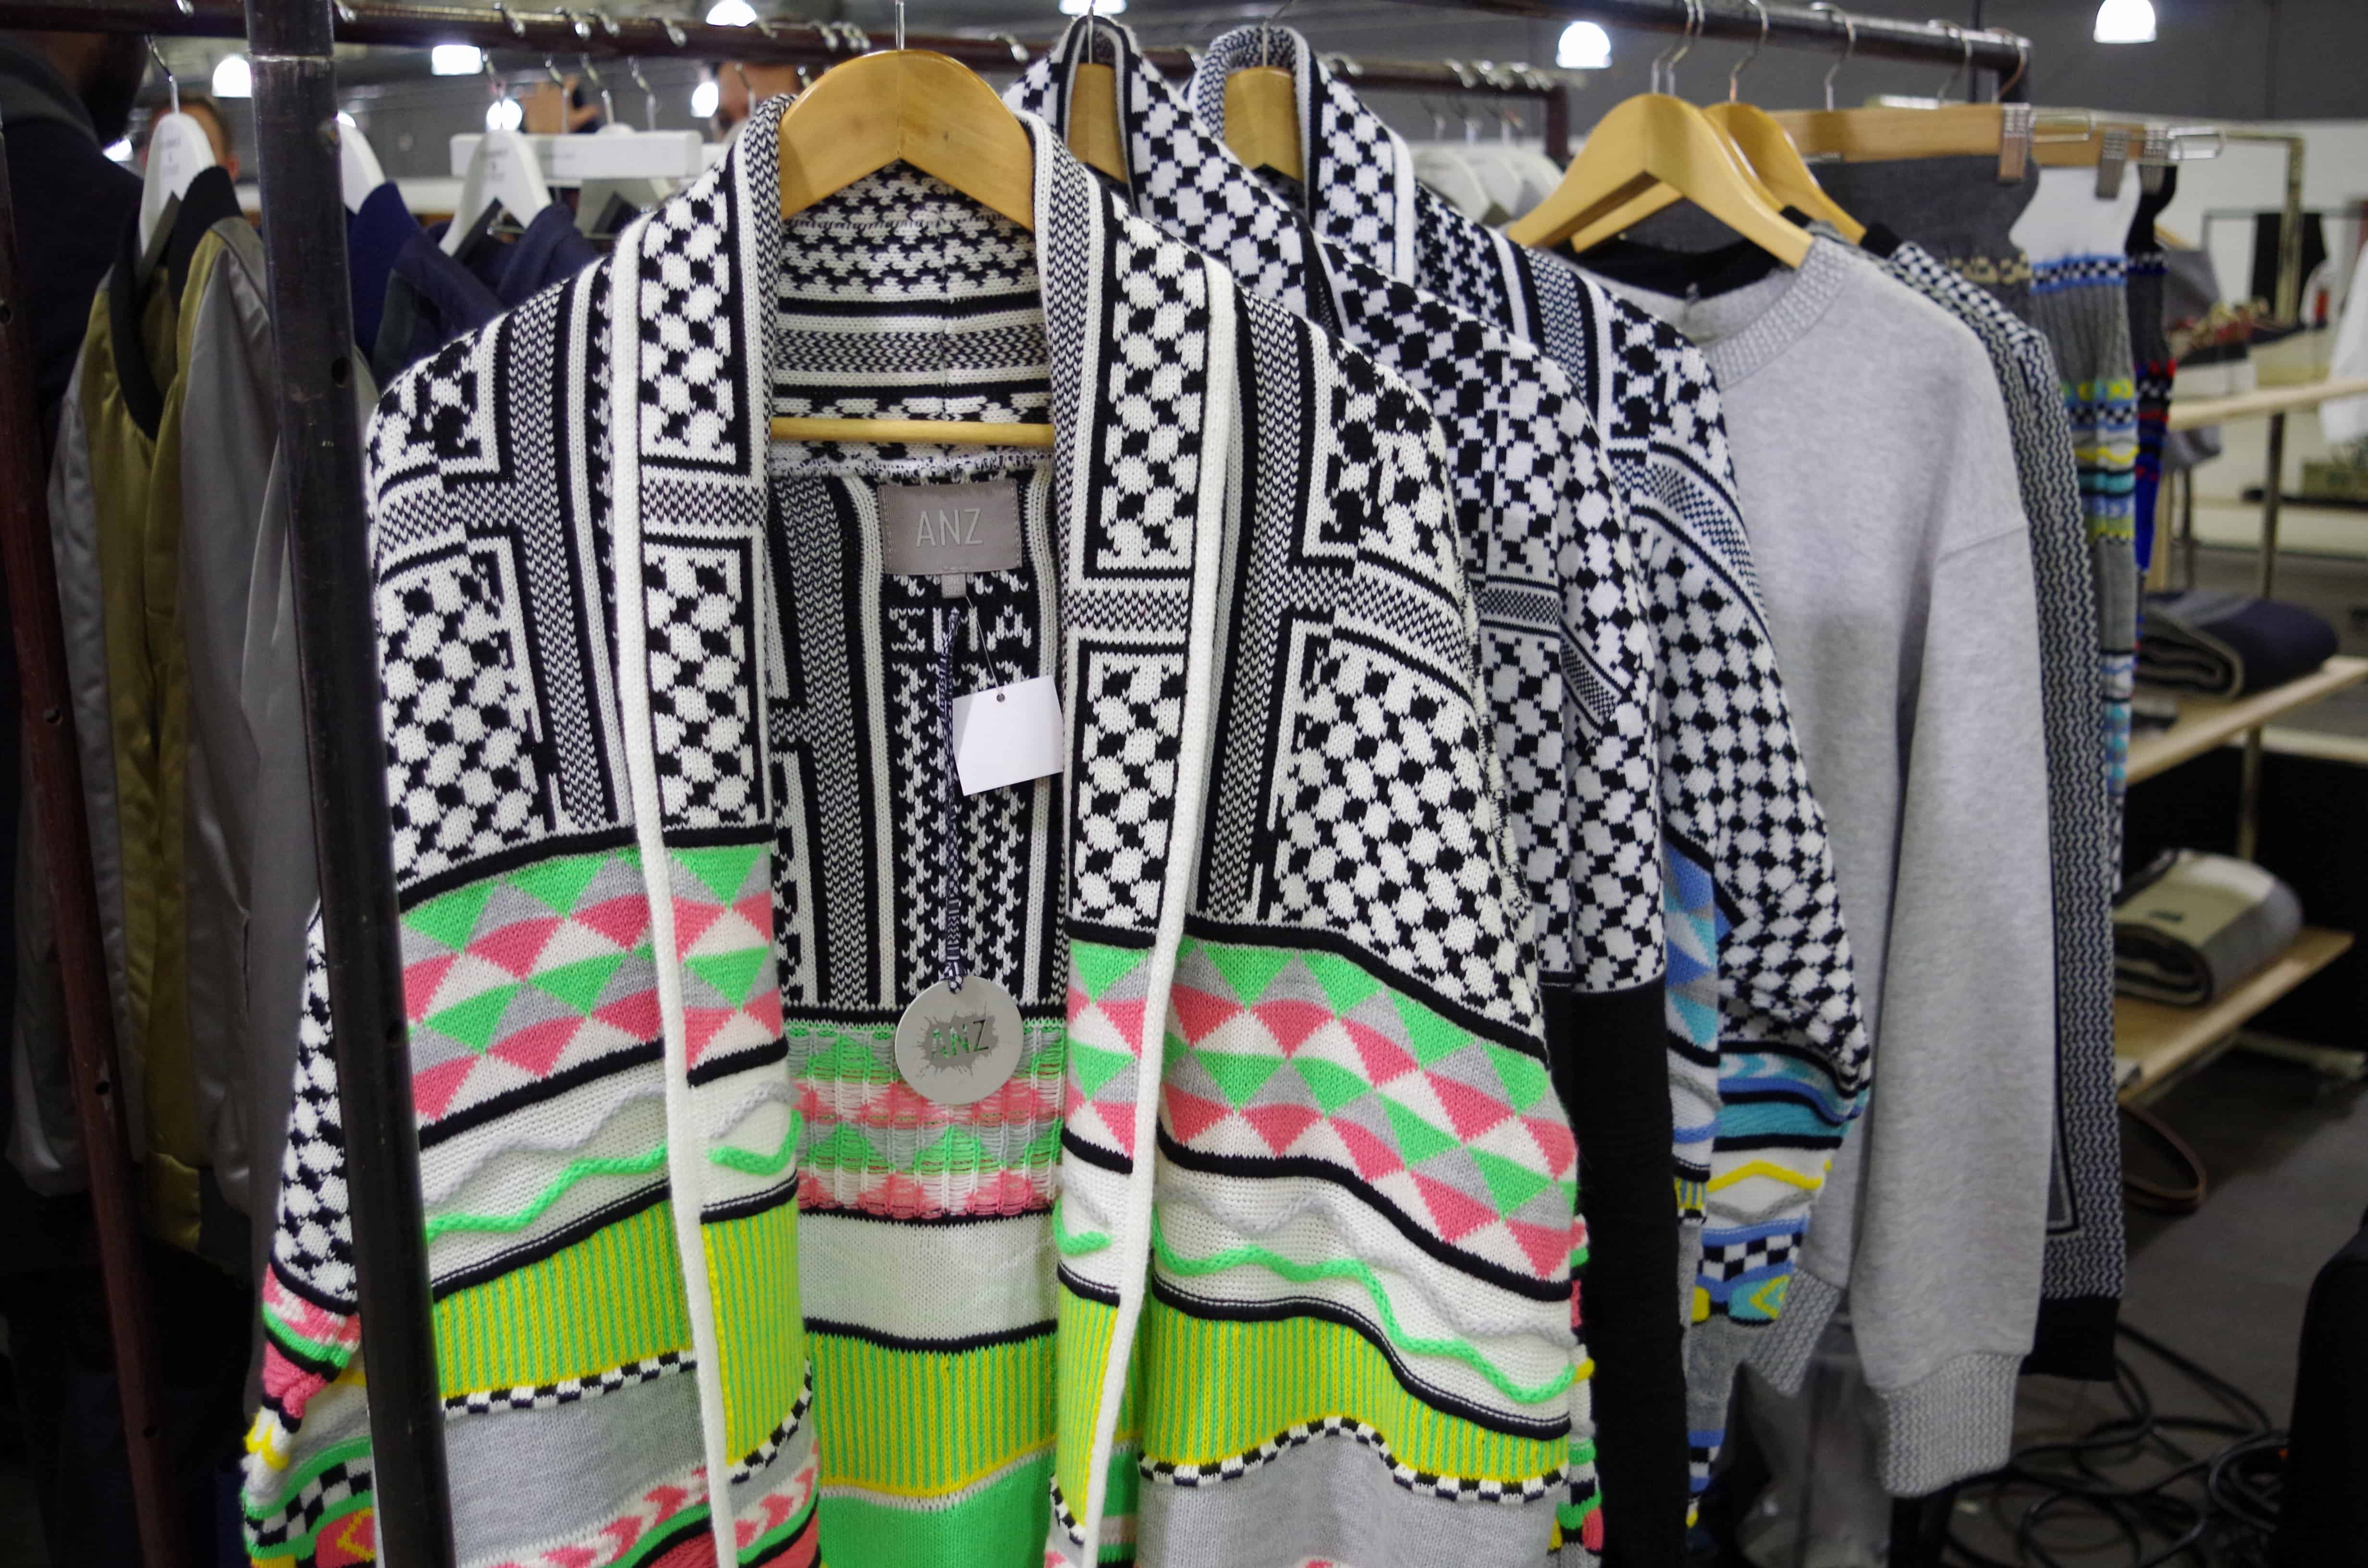 The 90's bold print men's sweater by AnZ.